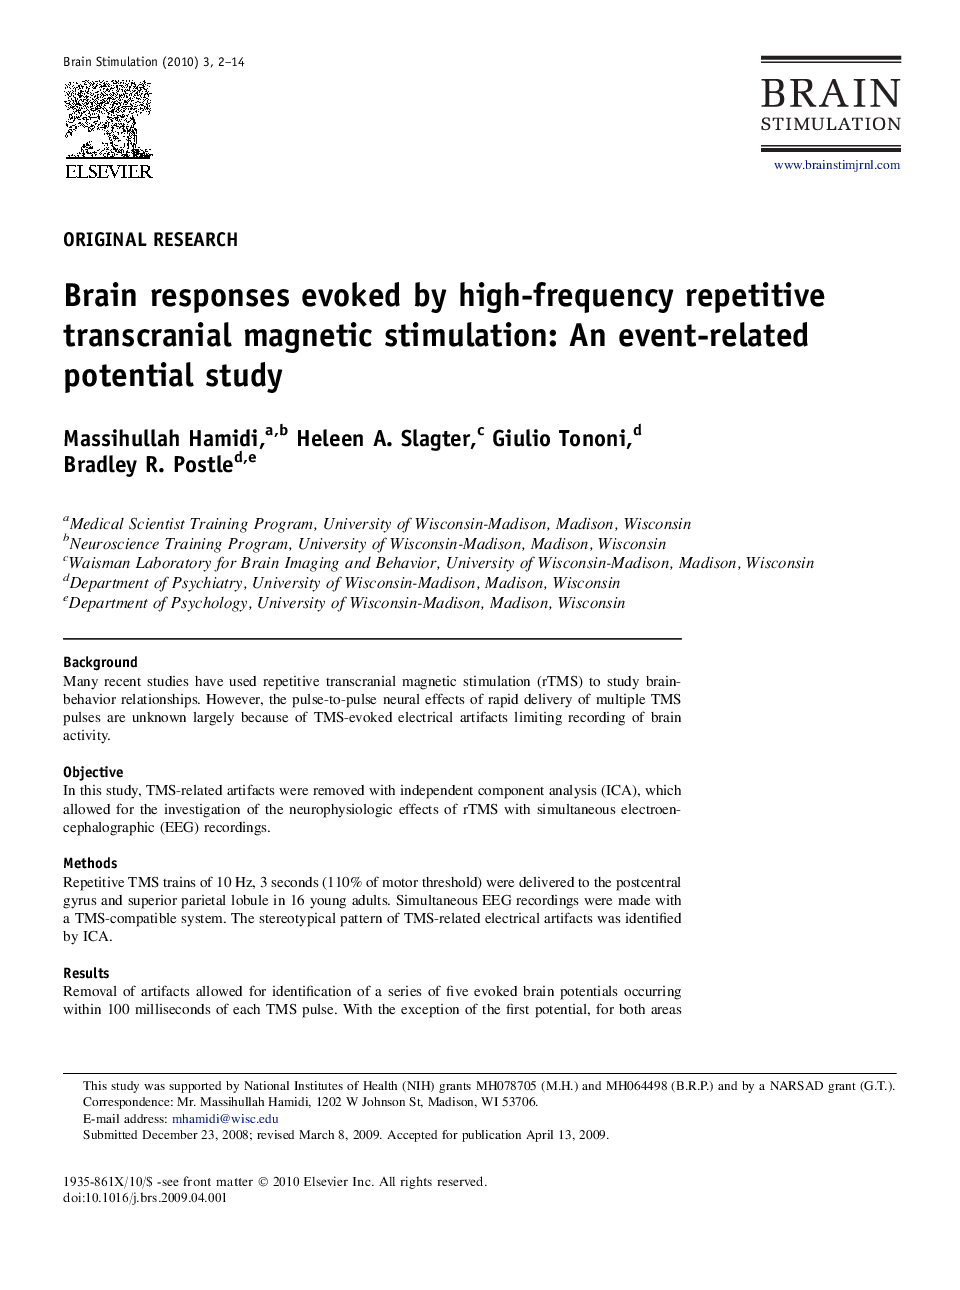 Brain responses evoked by high-frequency repetitive transcranial magnetic stimulation: An event-related potential study 